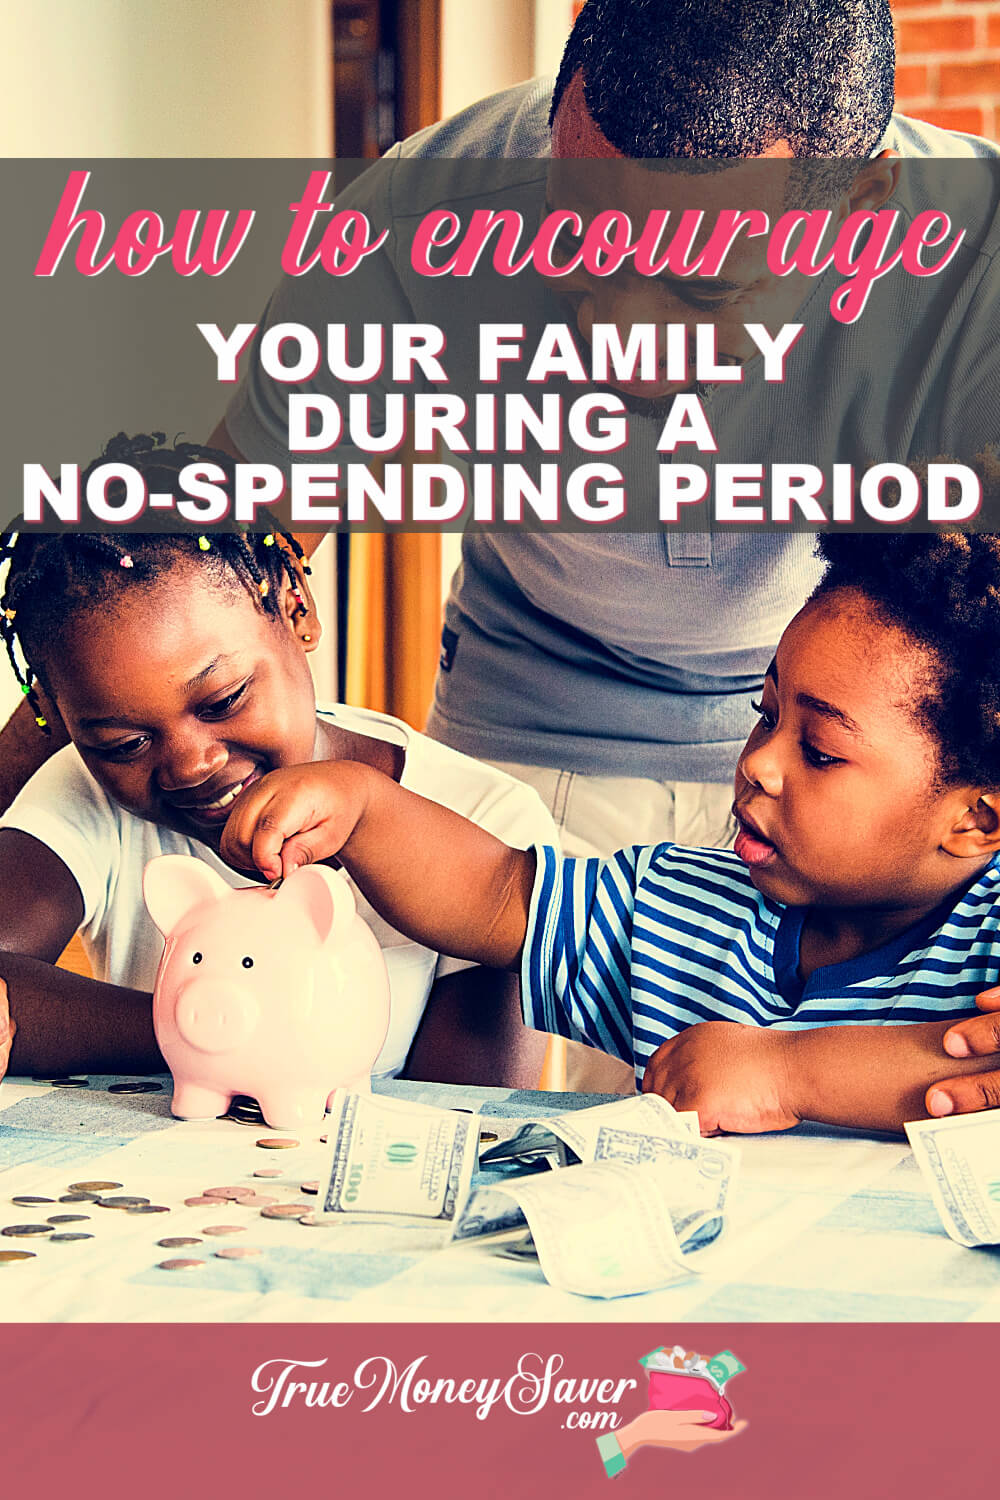 How To Encourage Your Family During A No-Spending Period